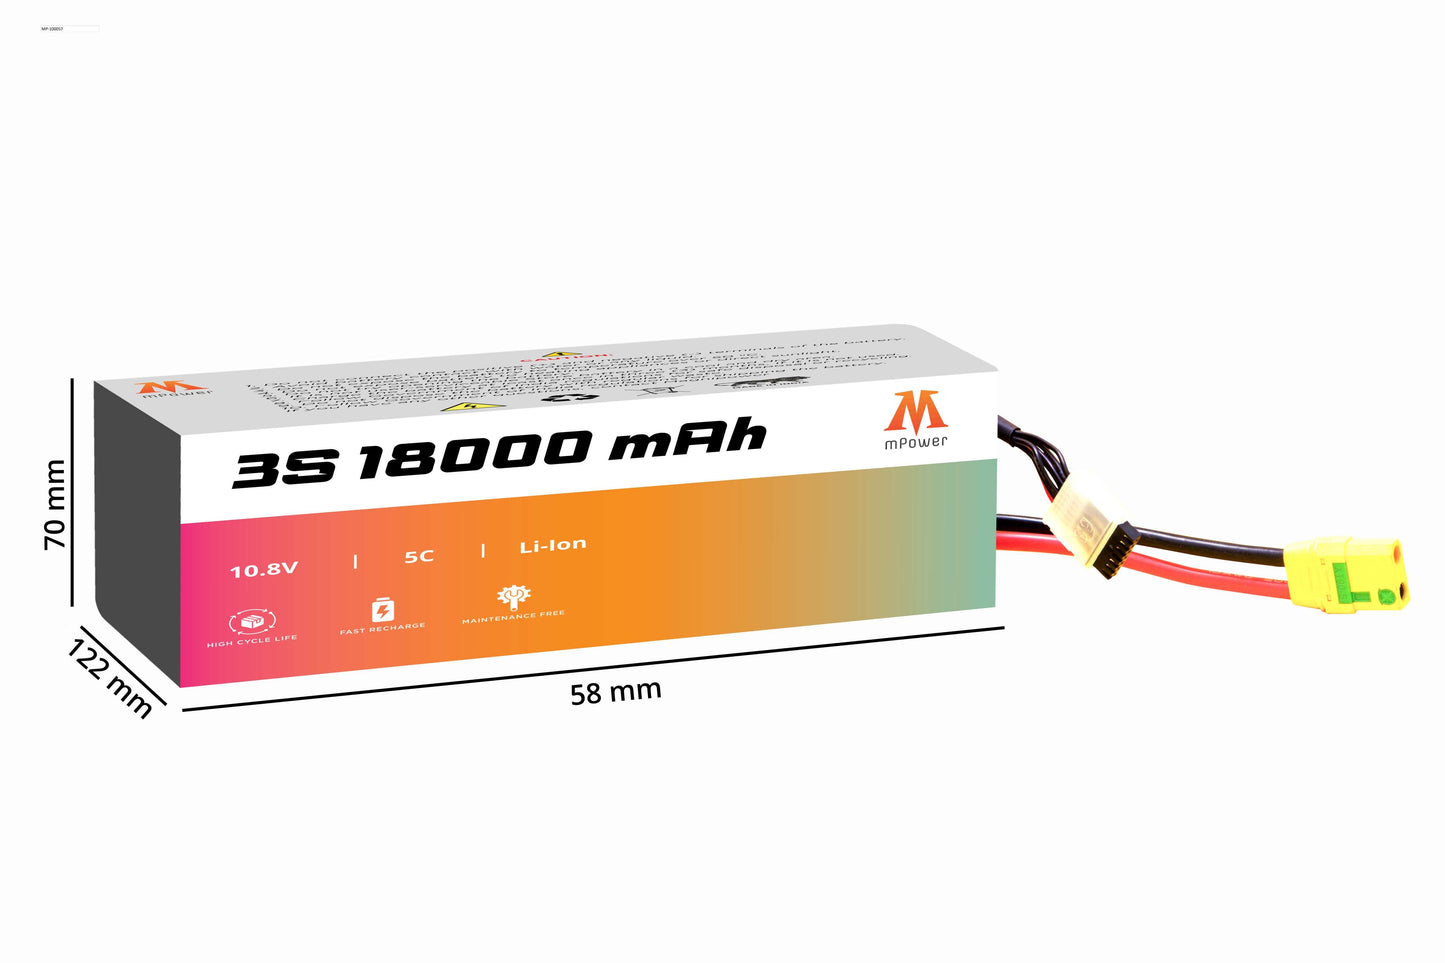 mPower 3S 18000mAh Lithium-Ion Battery for Survey Drones